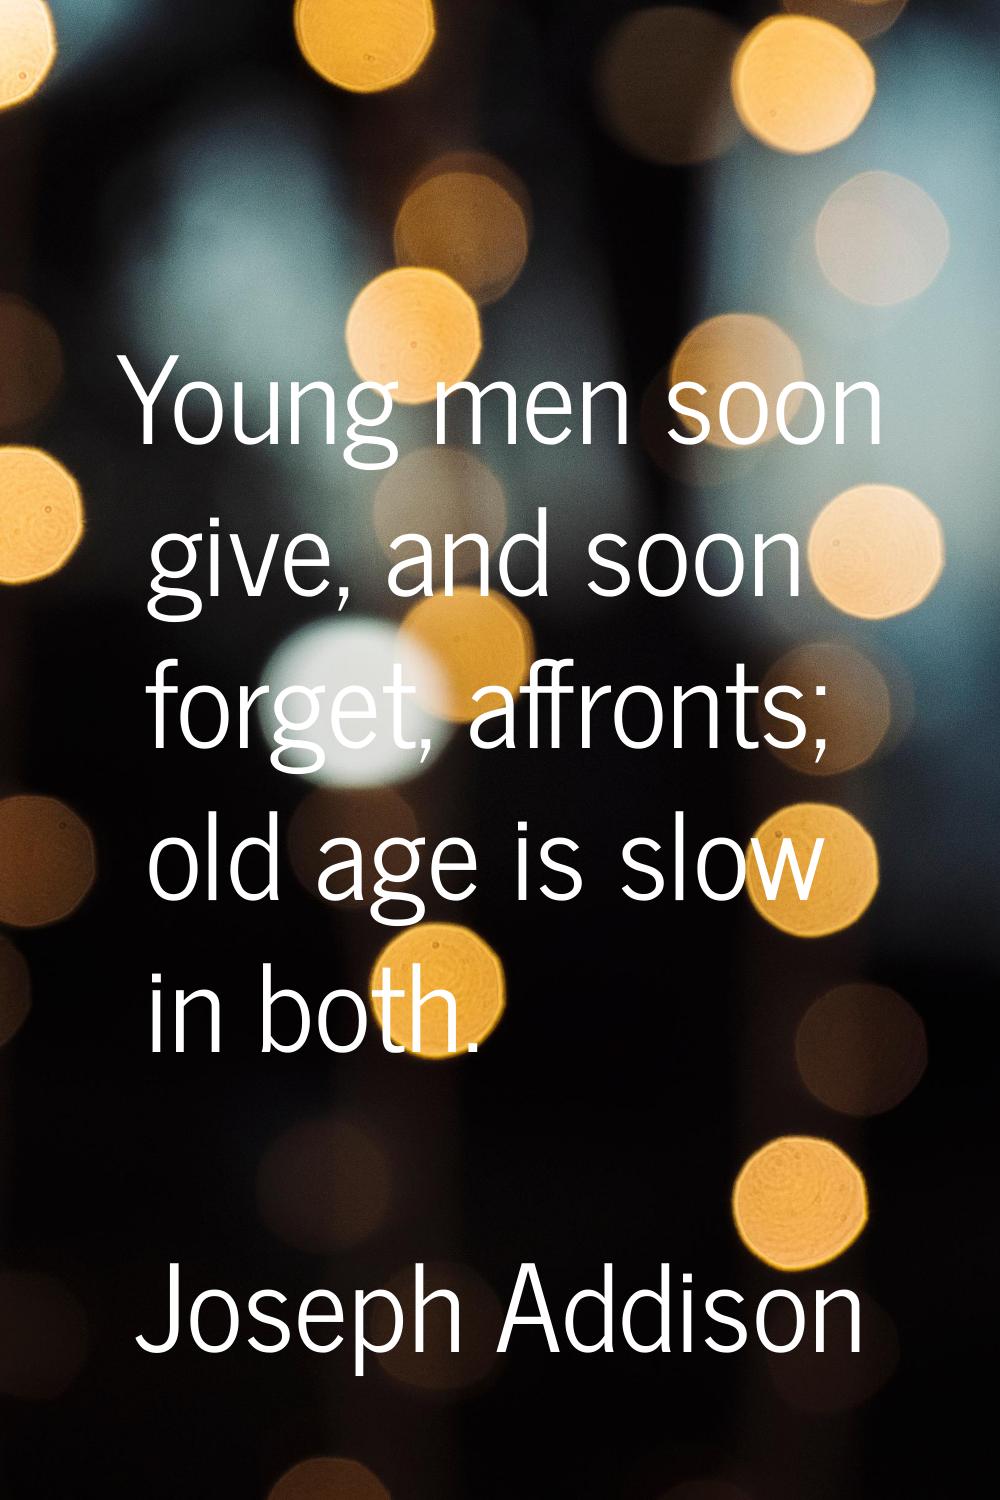 Young men soon give, and soon forget, affronts; old age is slow in both.